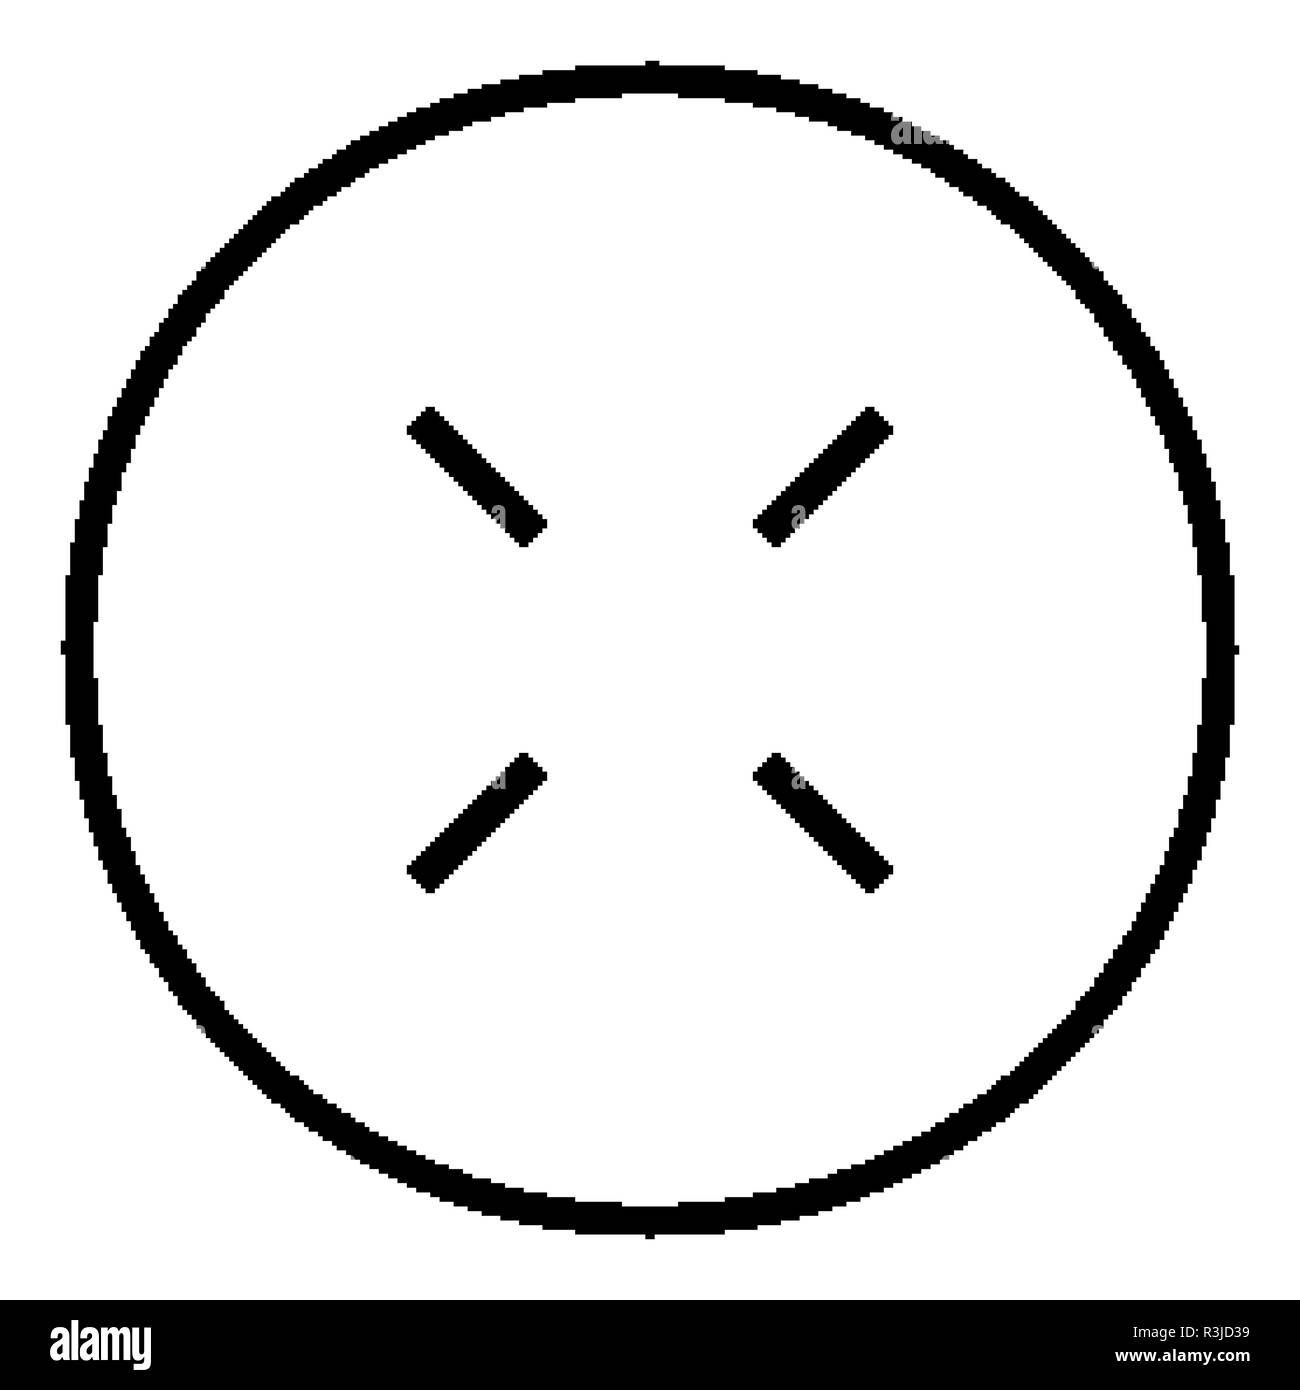 Simple collimator sight sniper scope crosshairs icon Stock Vector